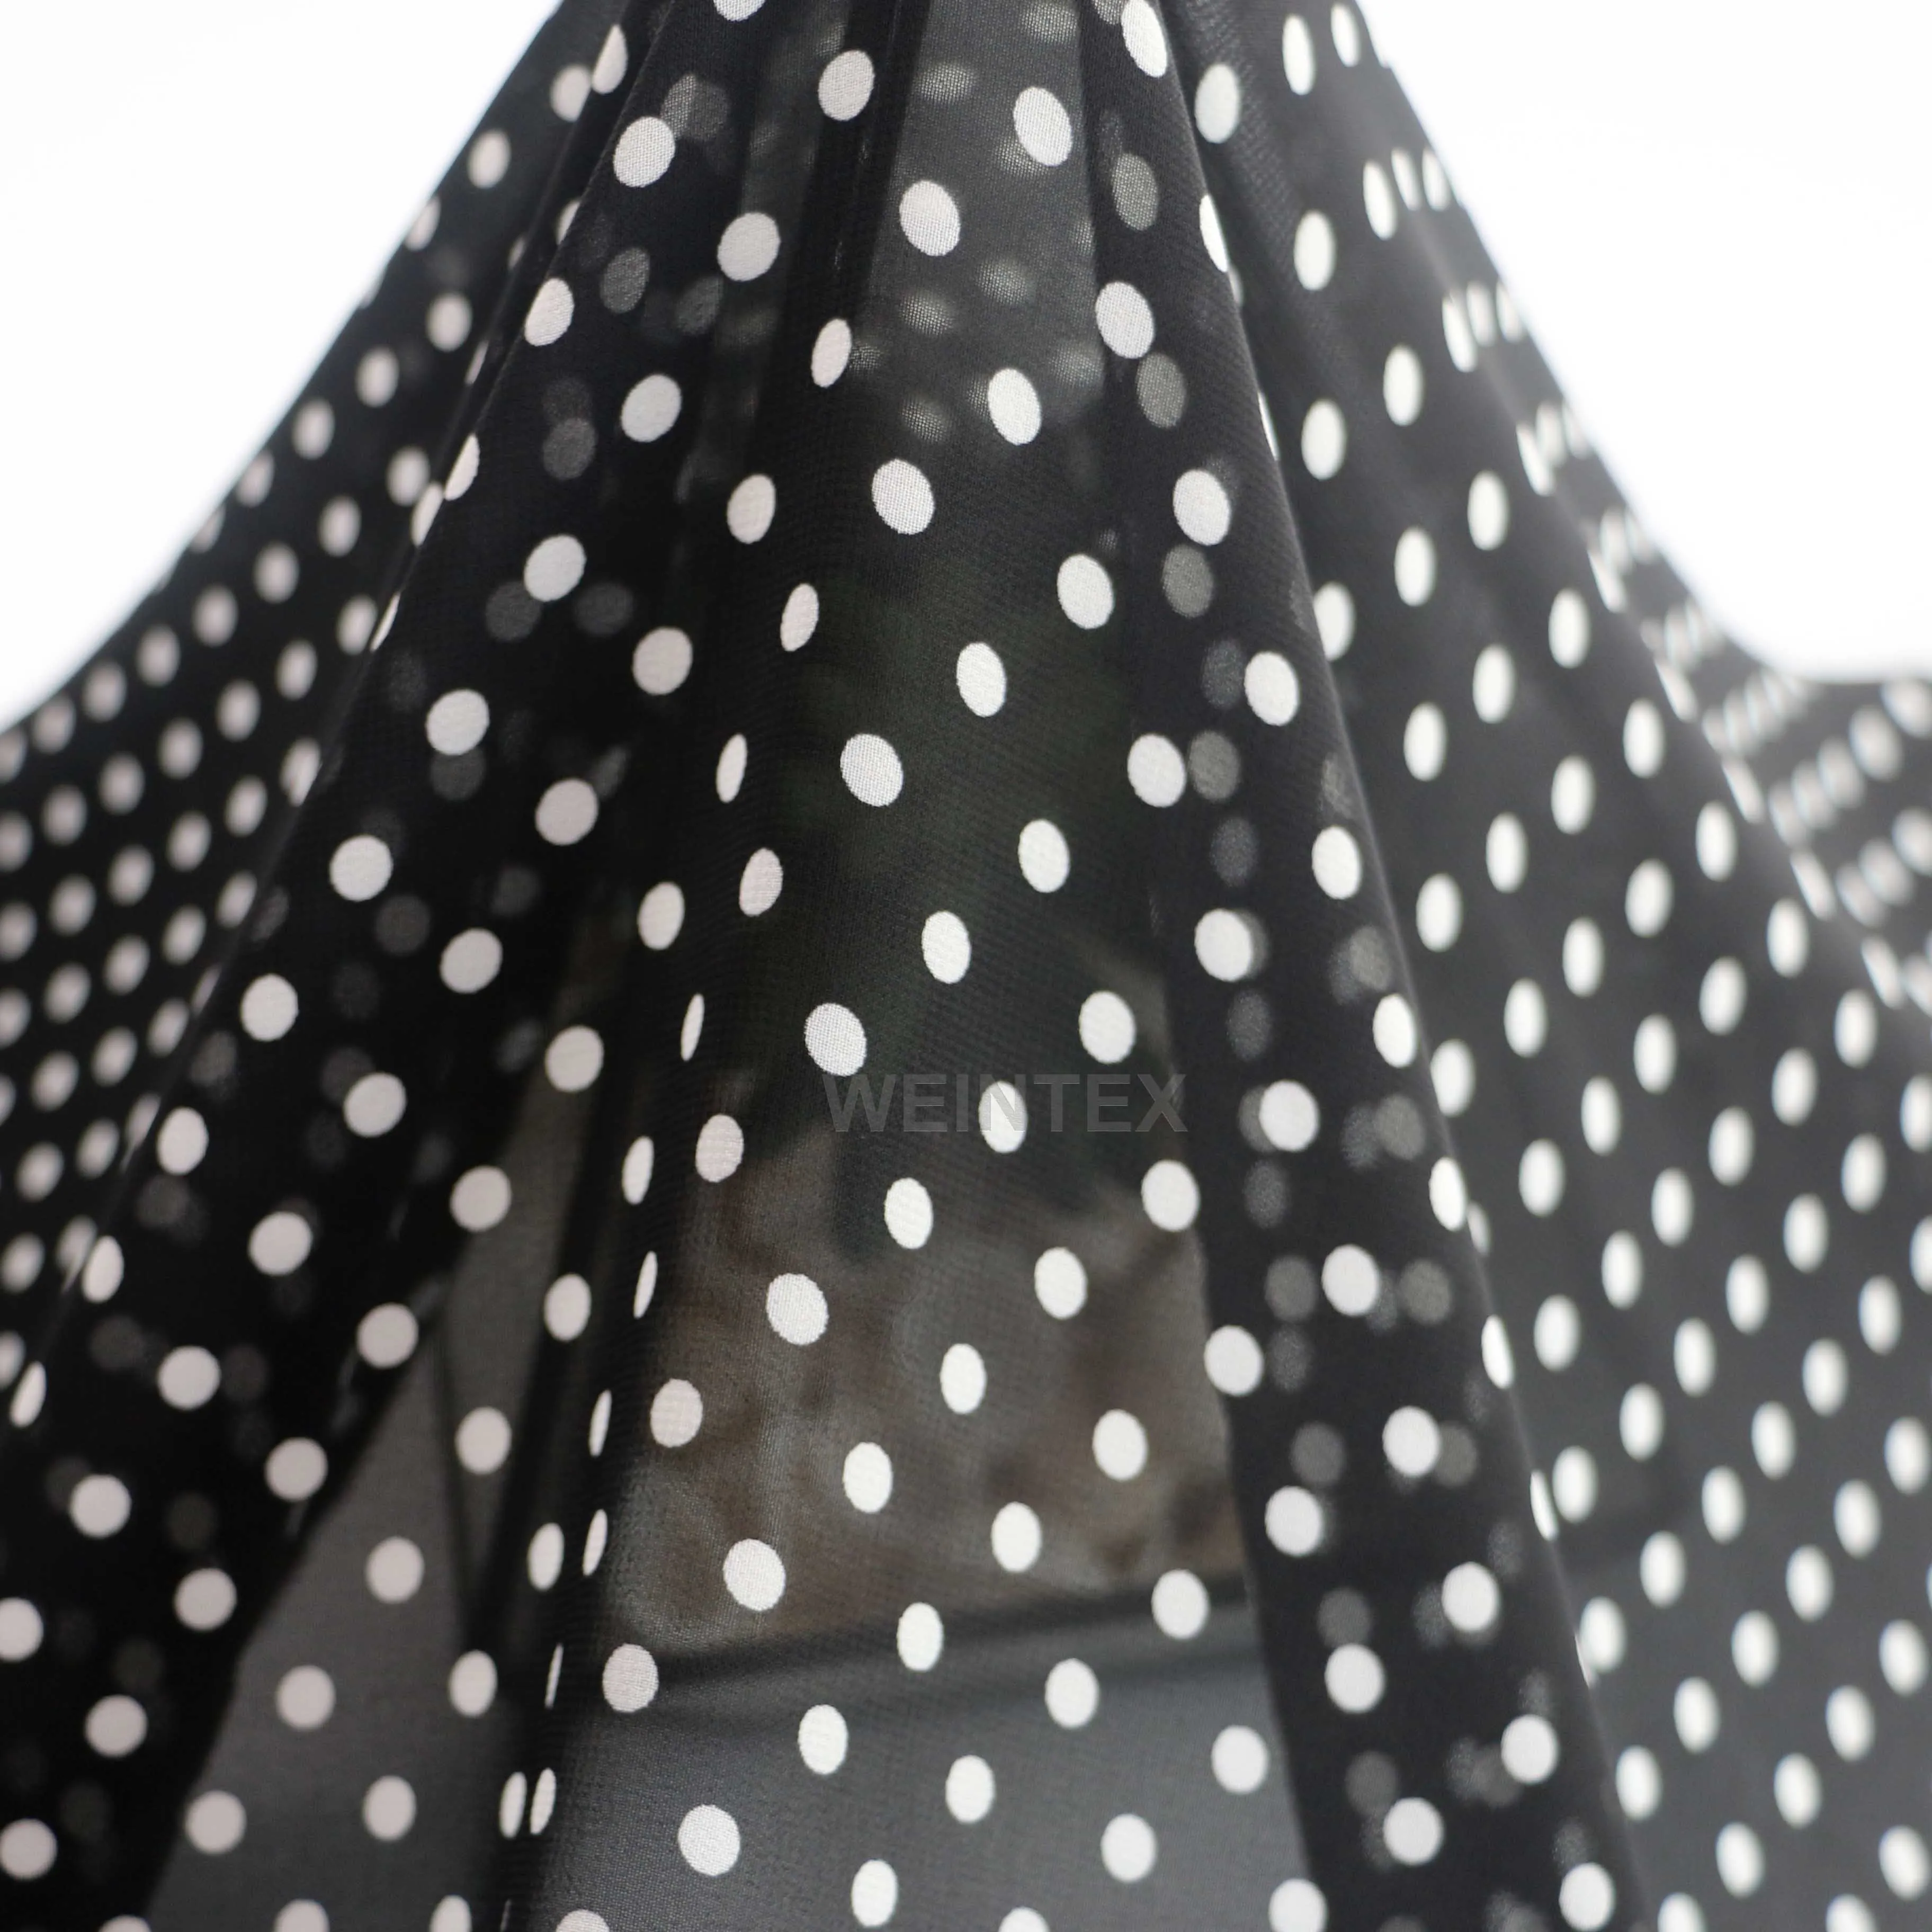 
WI-A07 China wholesale stock lot polyester 6mm polka dot chiffon fabric for dress and scarf 